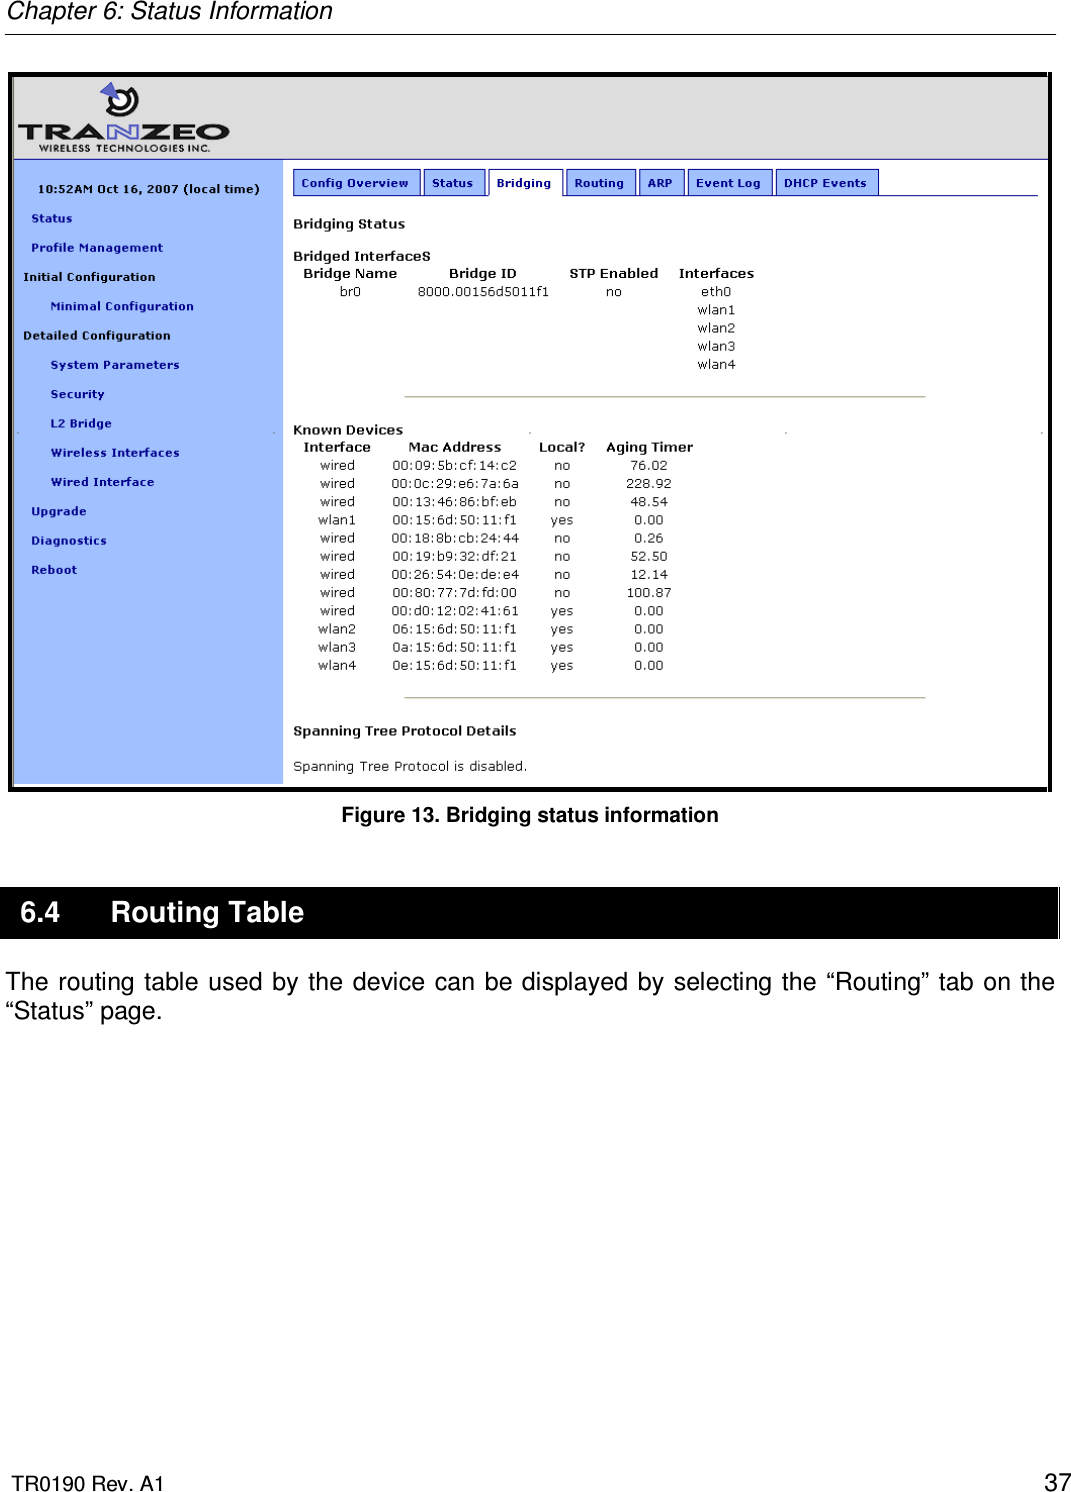 Chapter 6: Status Information  TR0190 Rev. A1    37  Figure 13. Bridging status information 6.4  Routing Table The routing table used by  the device can  be displayed by selecting the  “Routing” tab on the “Status” page.  